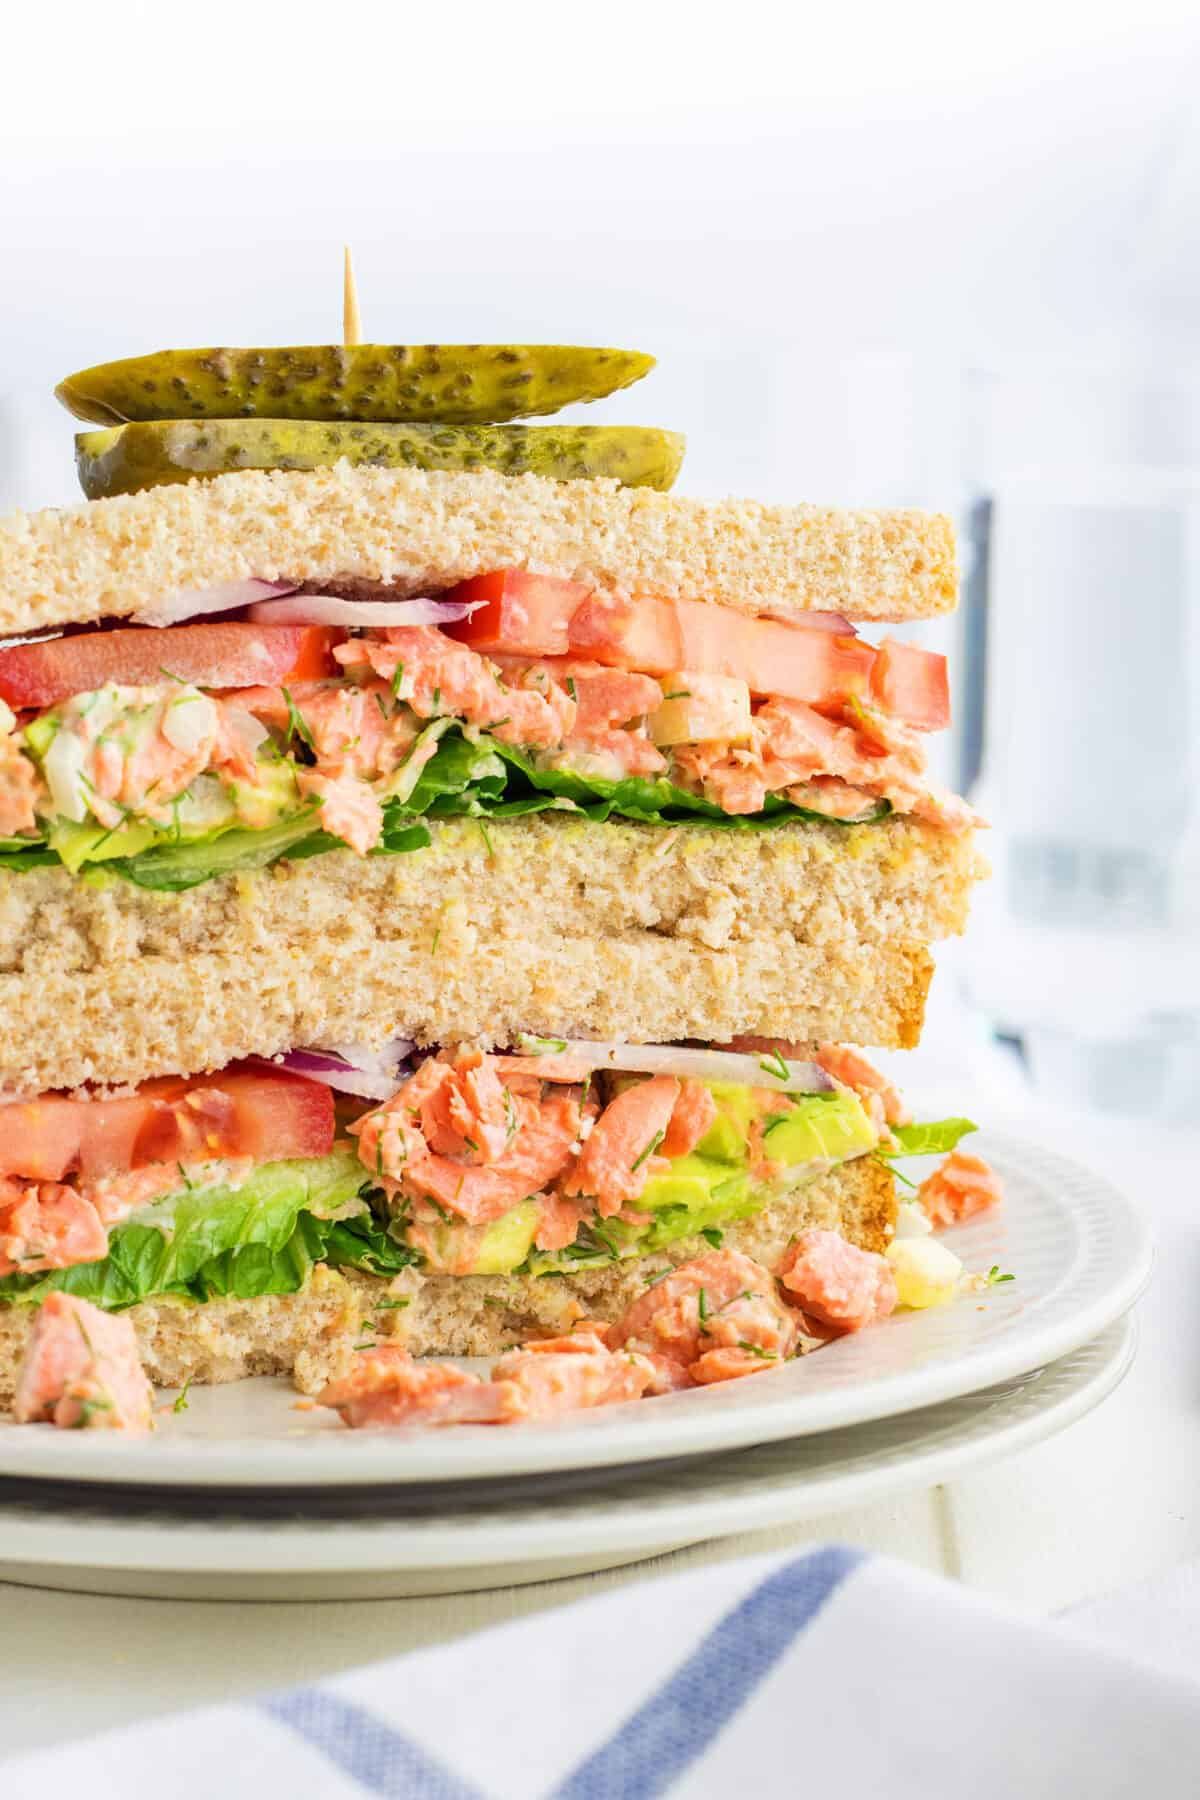  salmon salad sandwich stacked on a plate with a pickle on top